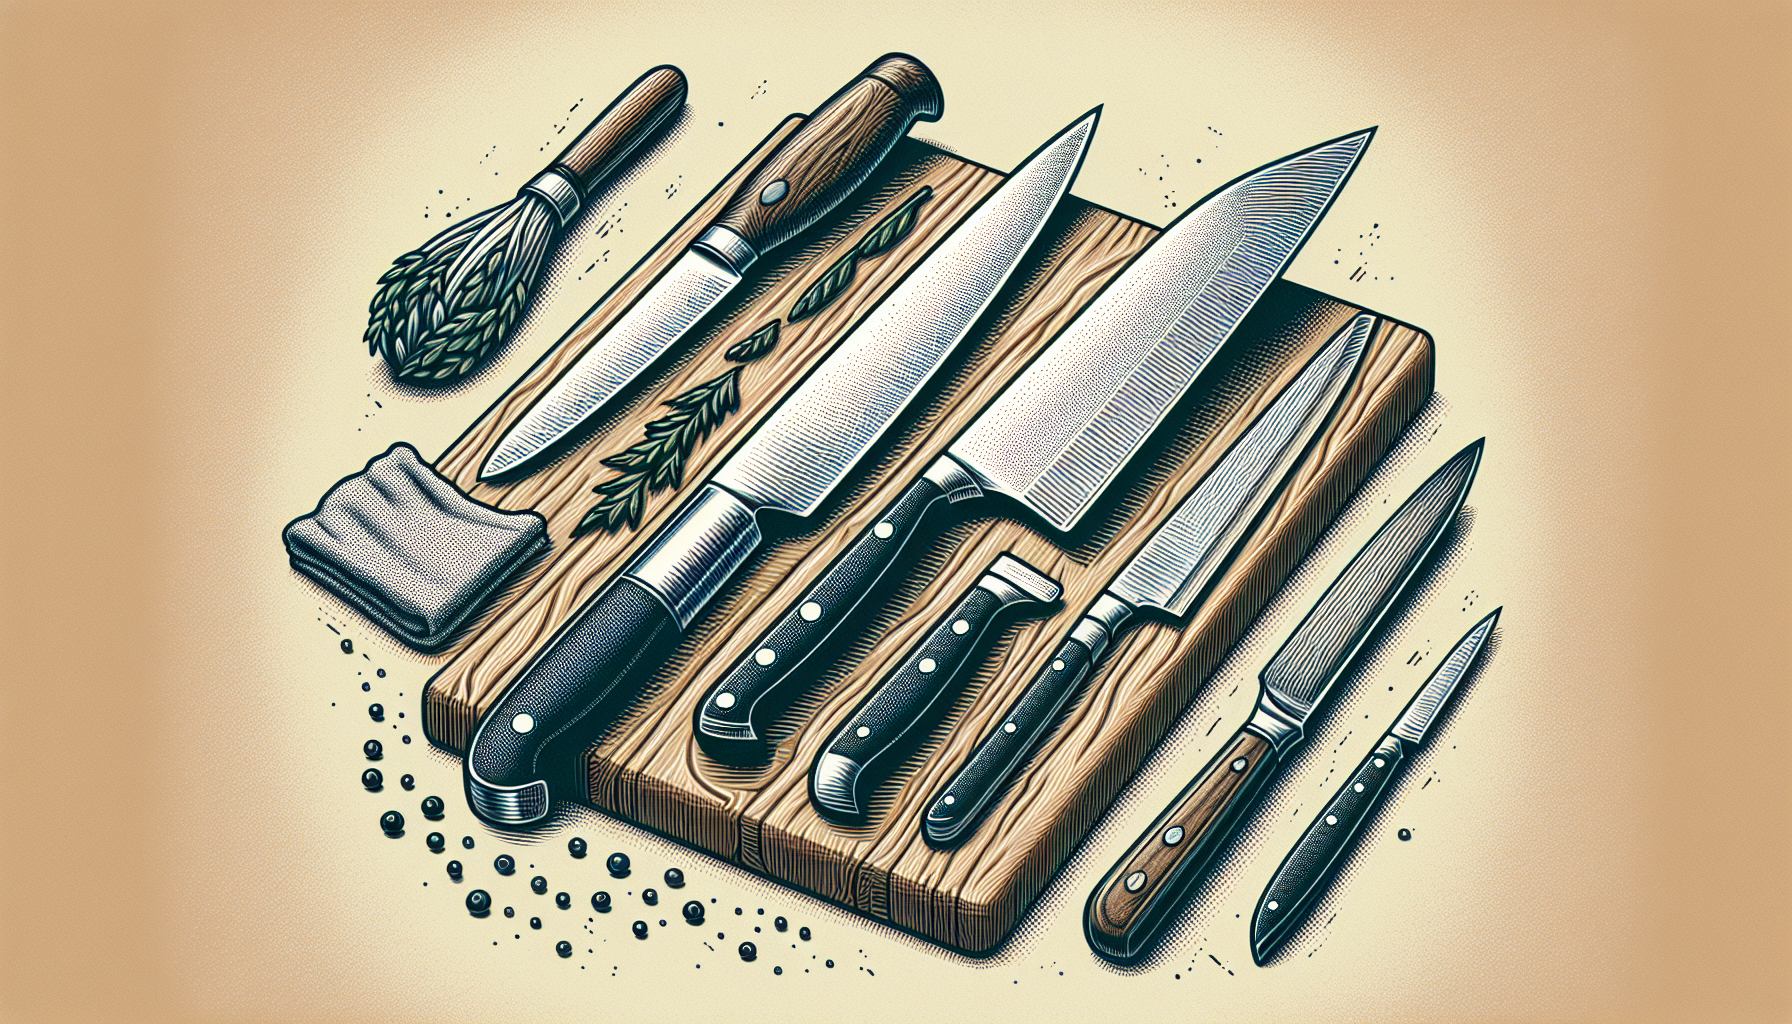 What Are The 4 Main Knives?